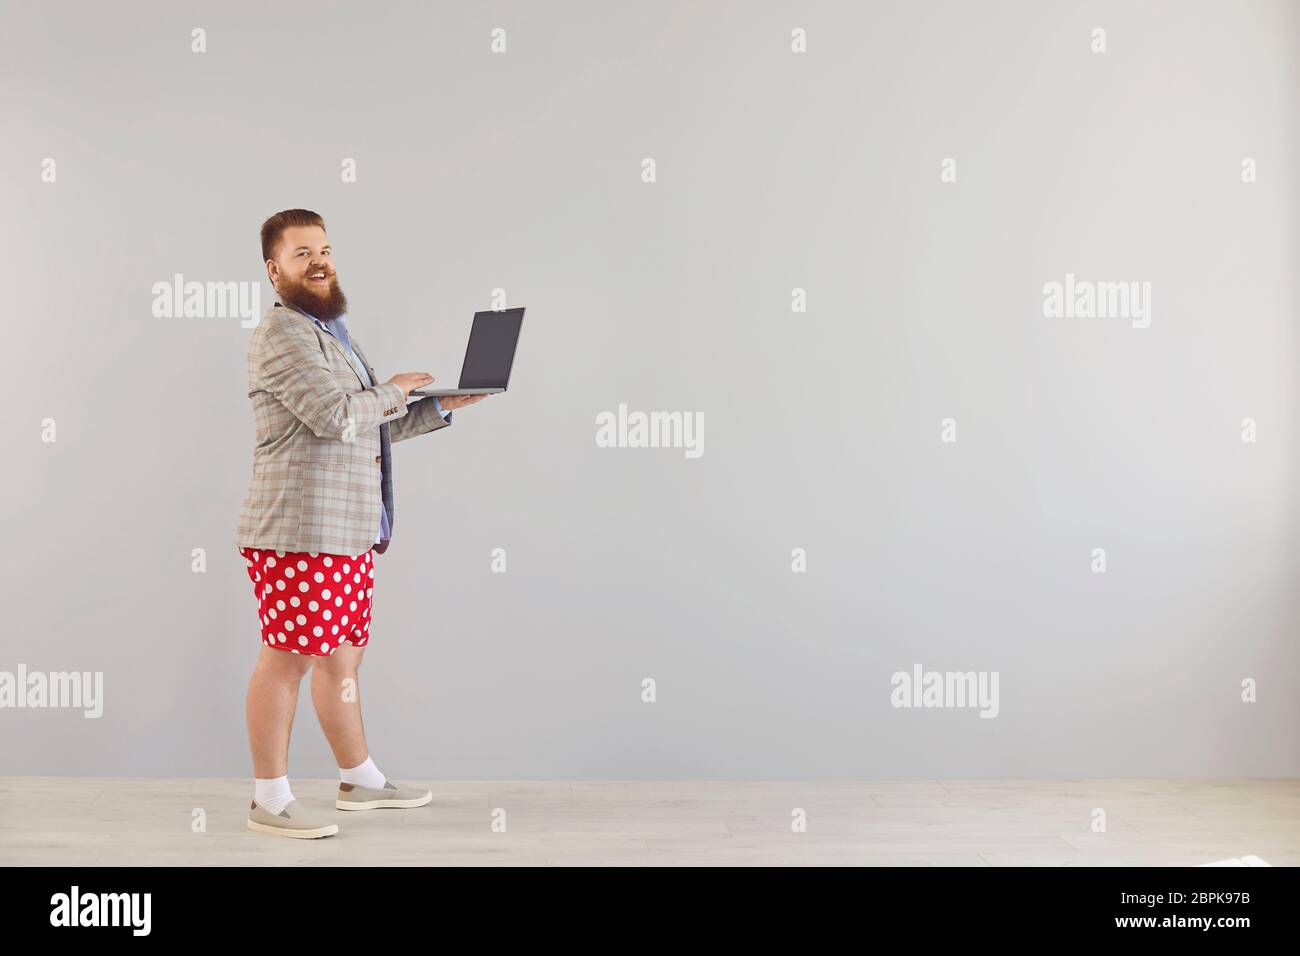 Funny fat man in a blue shirt and red shorts standing working online using a laptop on a gray background. Stock Photo